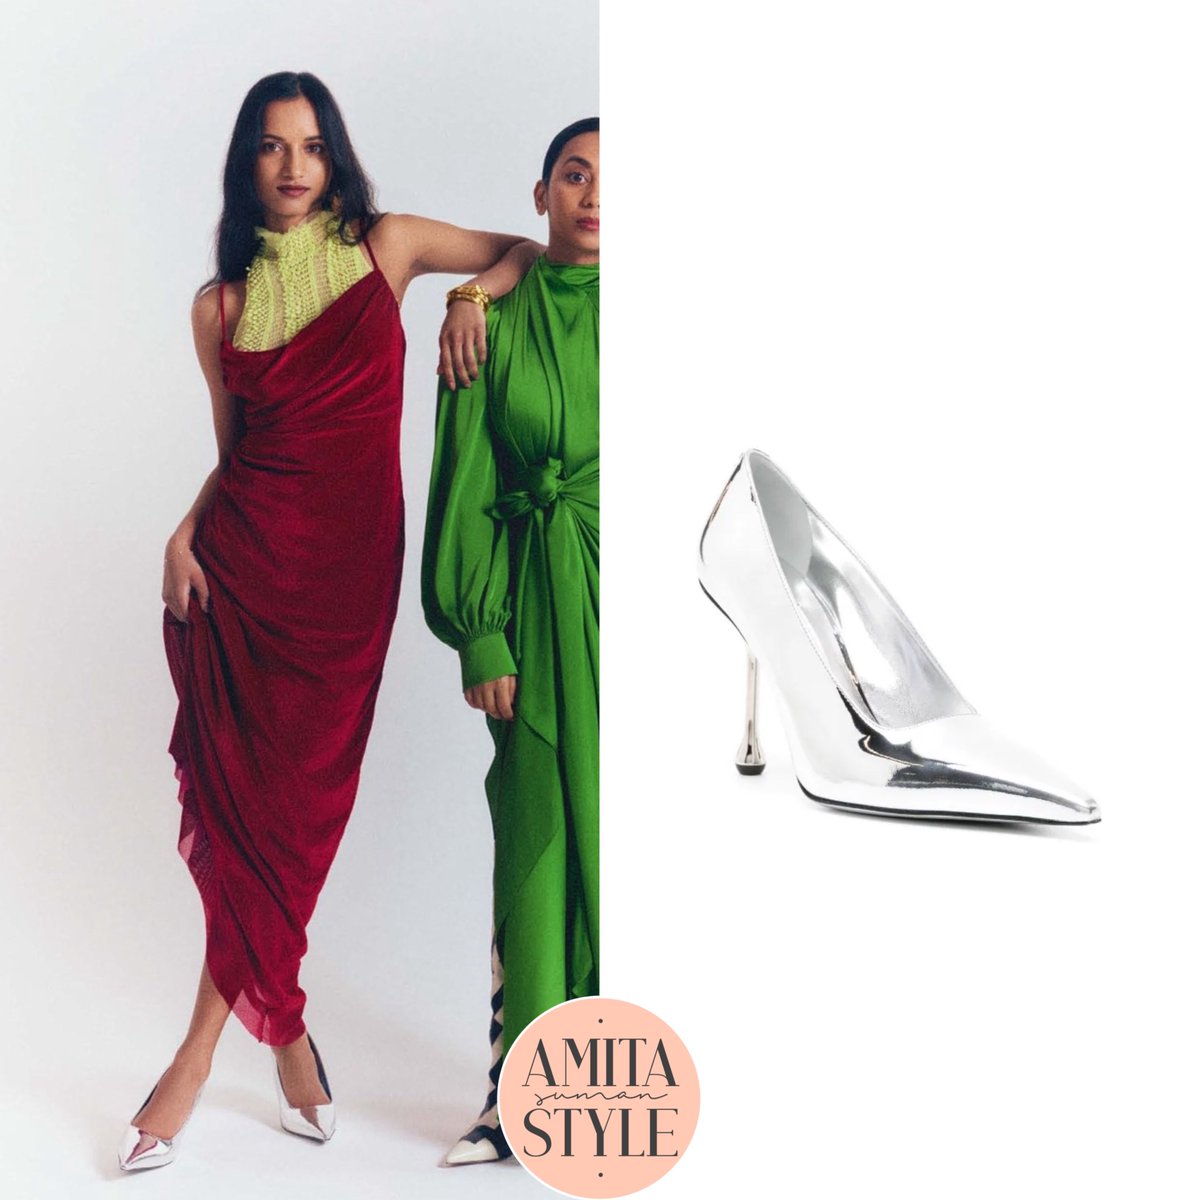 Amita Suman wore the #CamillaAndMarc ‘Lilo Dress’ (£495) and the #RobertaEiner ‘Angel Top’ (£275) She also wore the #JimmyChoo ‘Ixia Pumps’ (£730) for her feature in Vogue India.